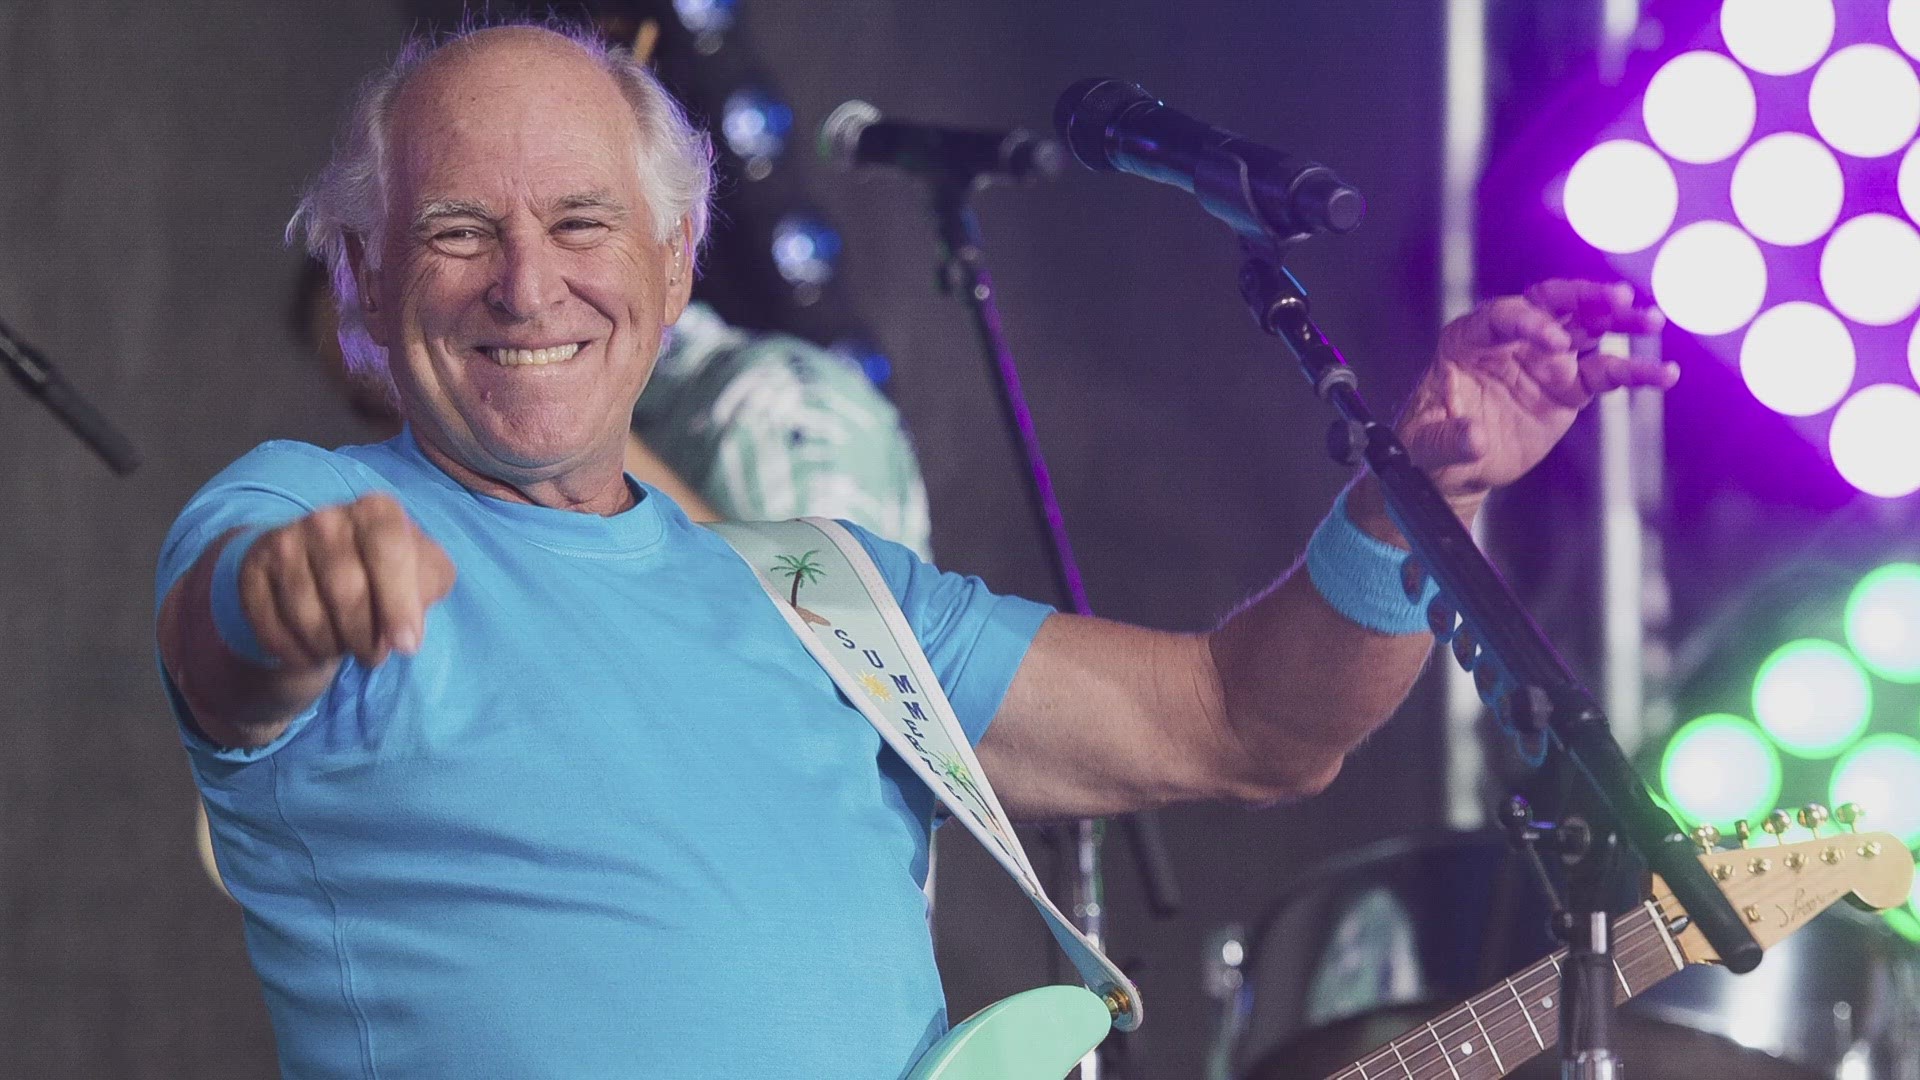 Fans around the world are mourning the loss of legendary singer/songwriter Jimmy Buffett. One Indy native reflects on his time working with him.